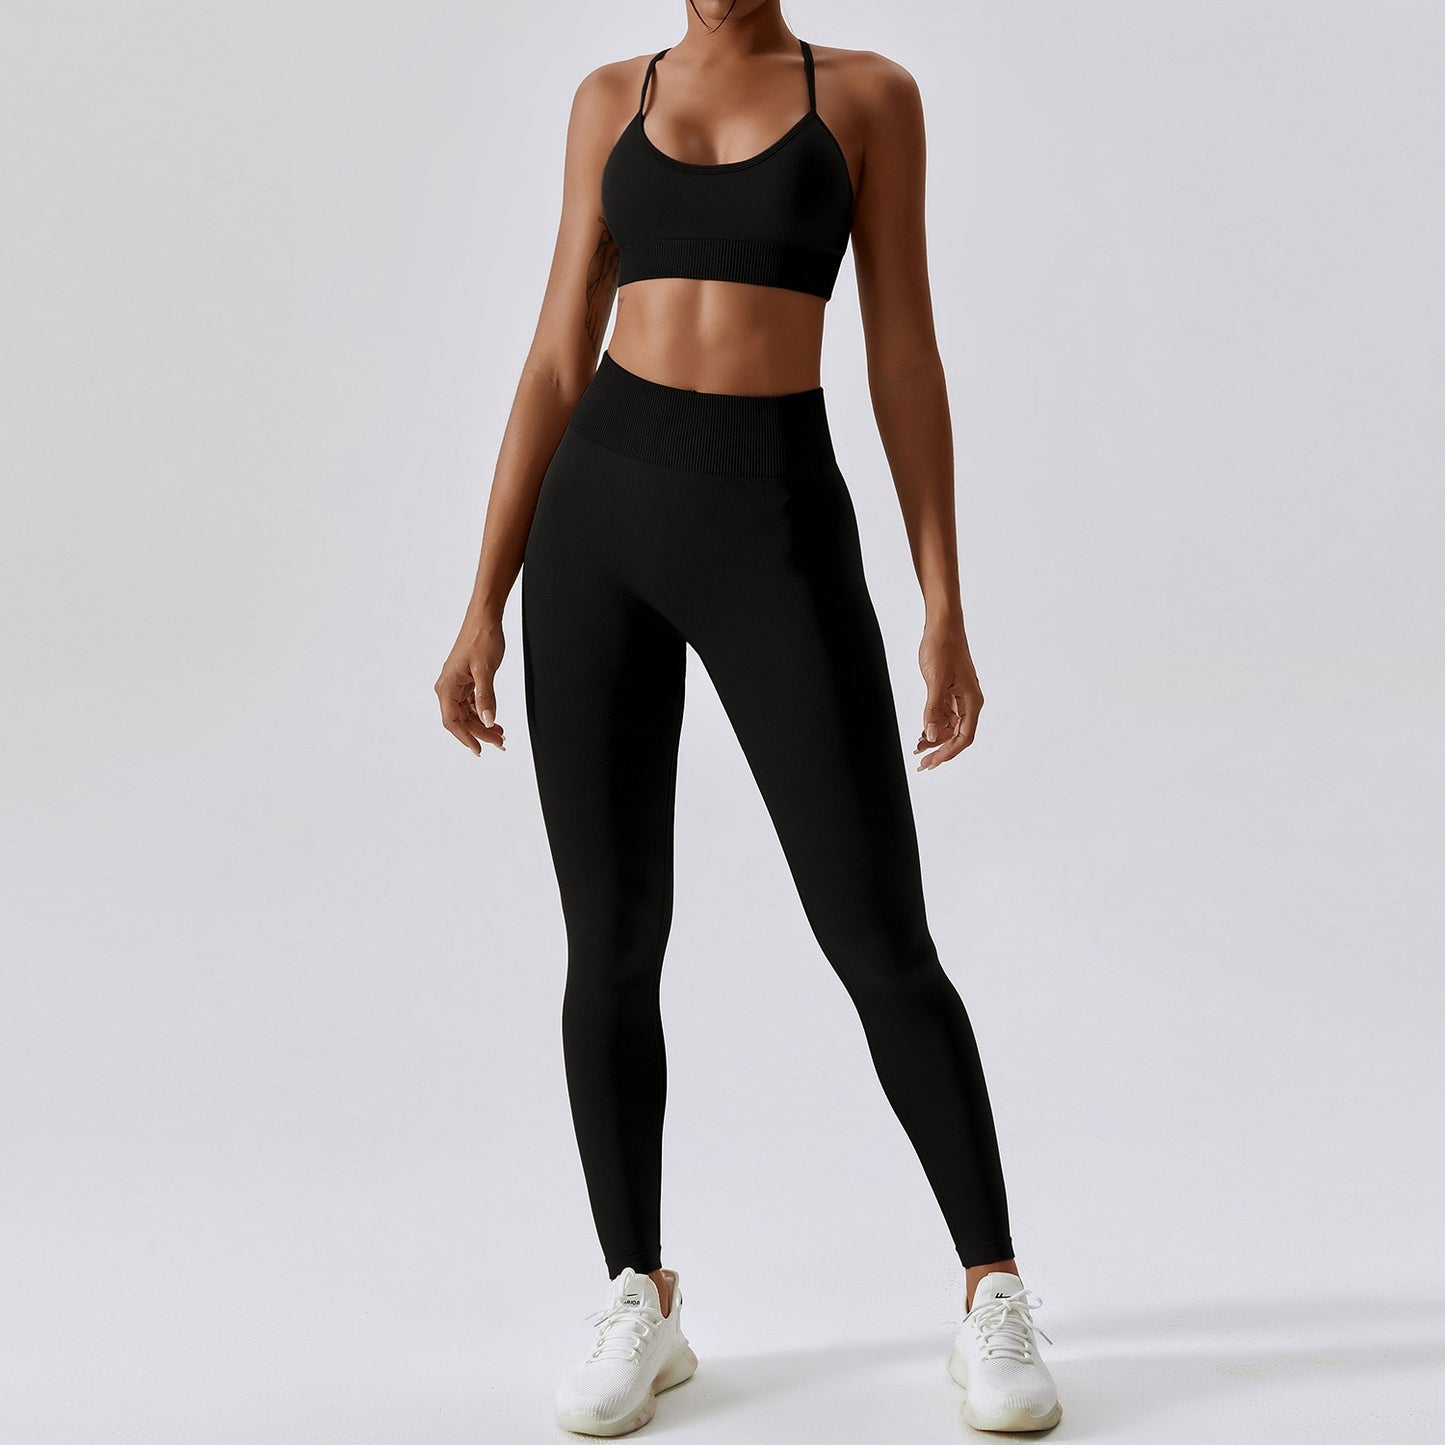 Seamless Athletic Wear Women Yoga Set 2 Piece Workout Tracksuit Sport Bra Gym Suits Fitness High Waist Running Leggings Sports Sets The Clothing Company Sydney